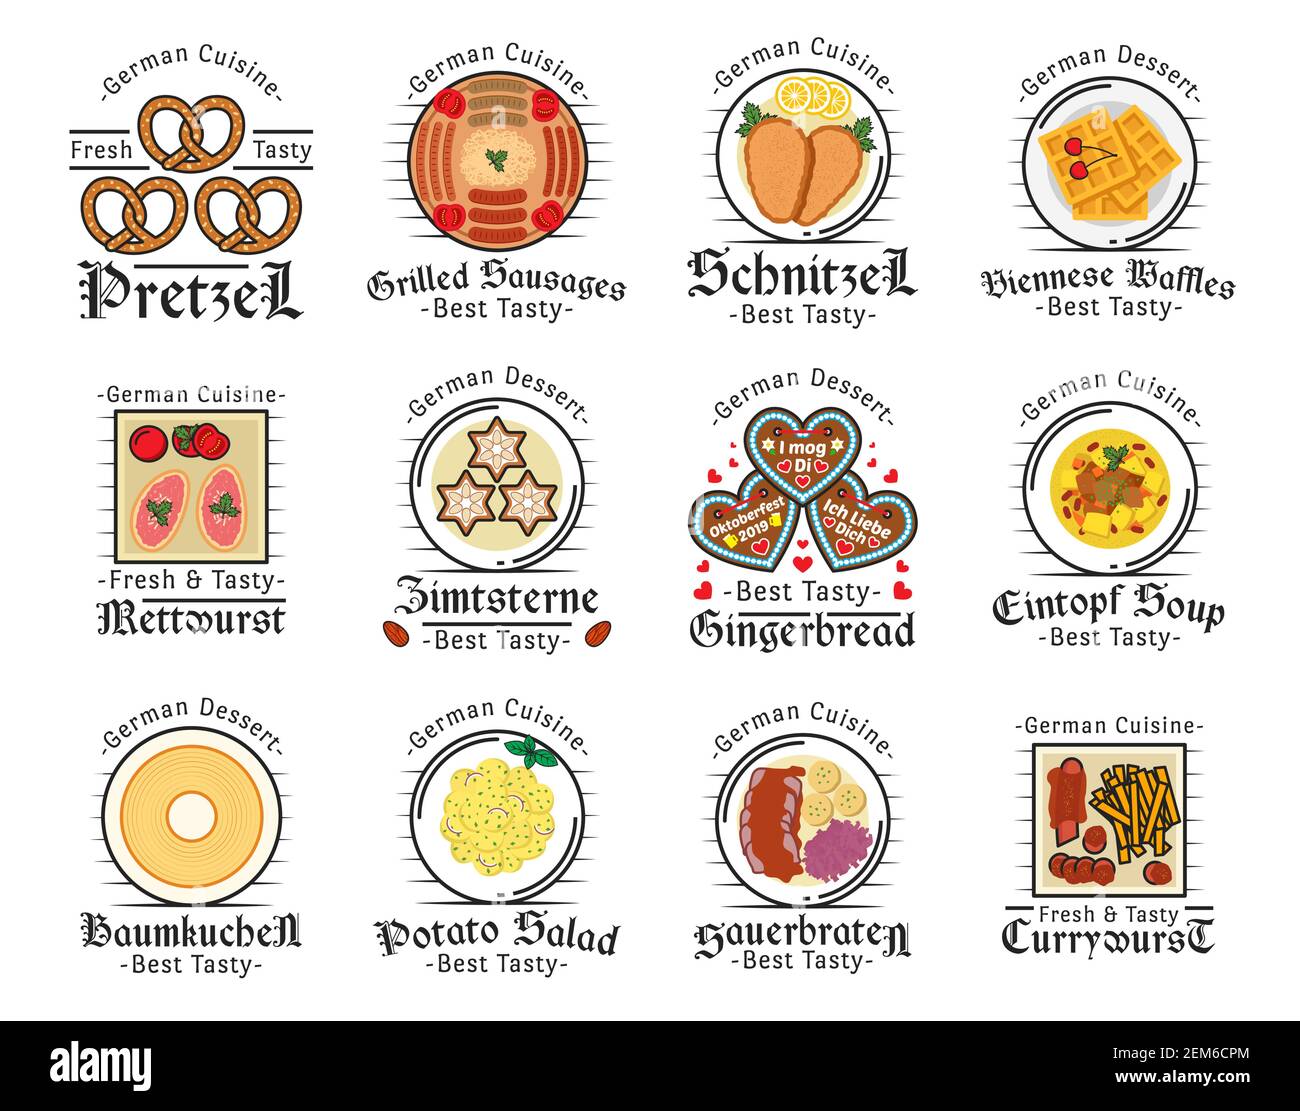 German cuisine vector icons of meat dishes with vegetables and desserts. Mettwurst sausages, pretzel and currywurst, schnitzel, eintopf and sauerbrate Stock Vector